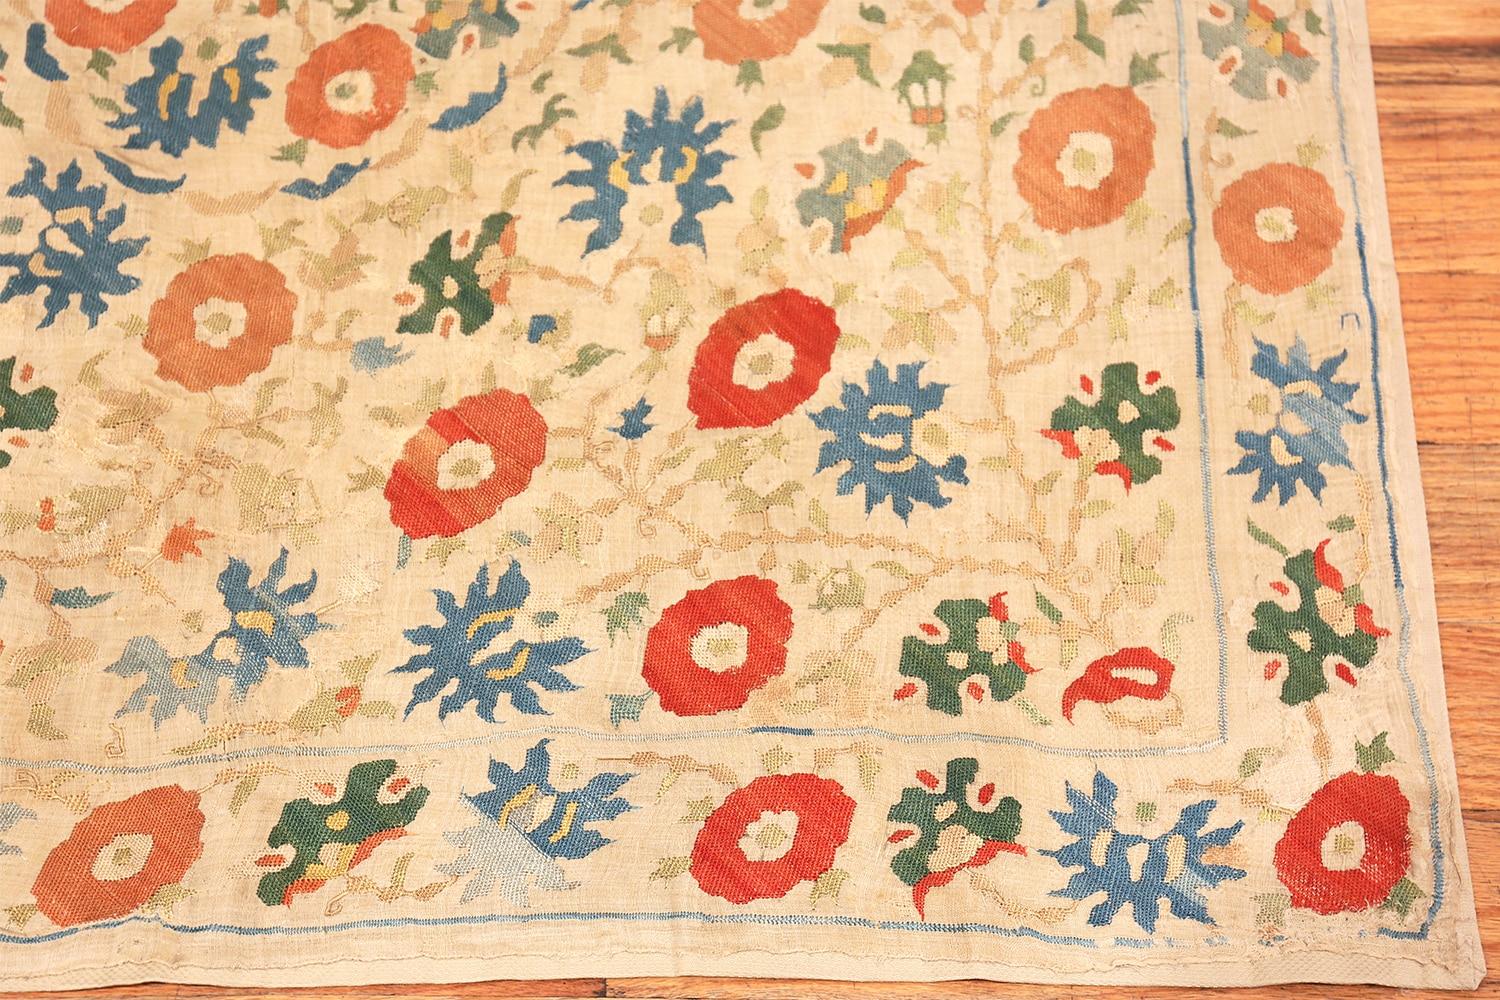 Turkish Beautiful Antique 18th Century Ottoman Embroidery Textile 3'10